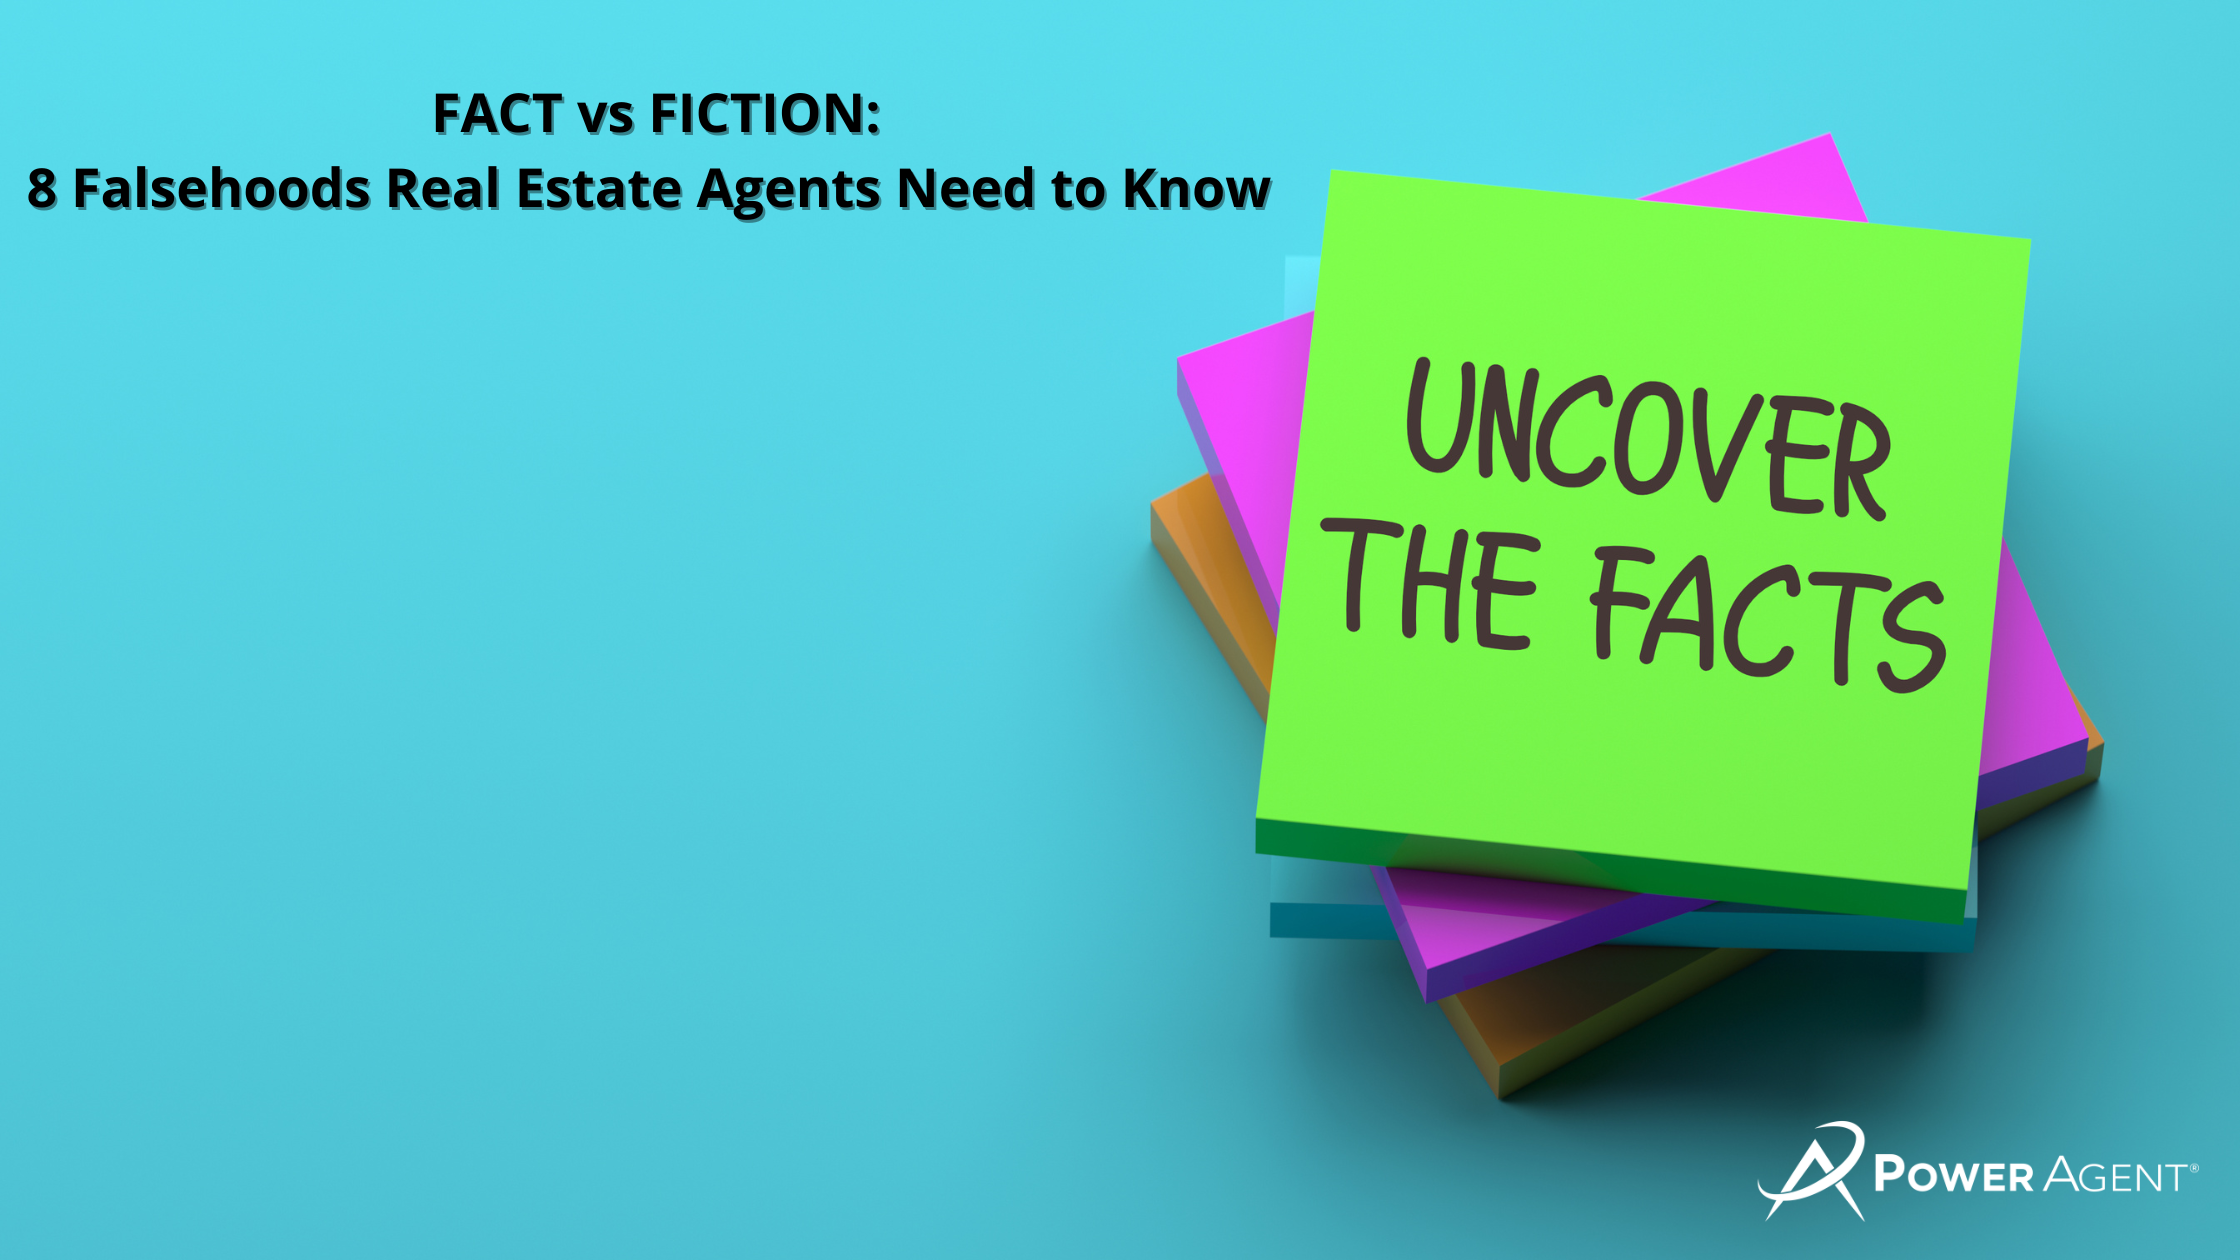 8 Falsehoods Real Estate Agents Need to Know